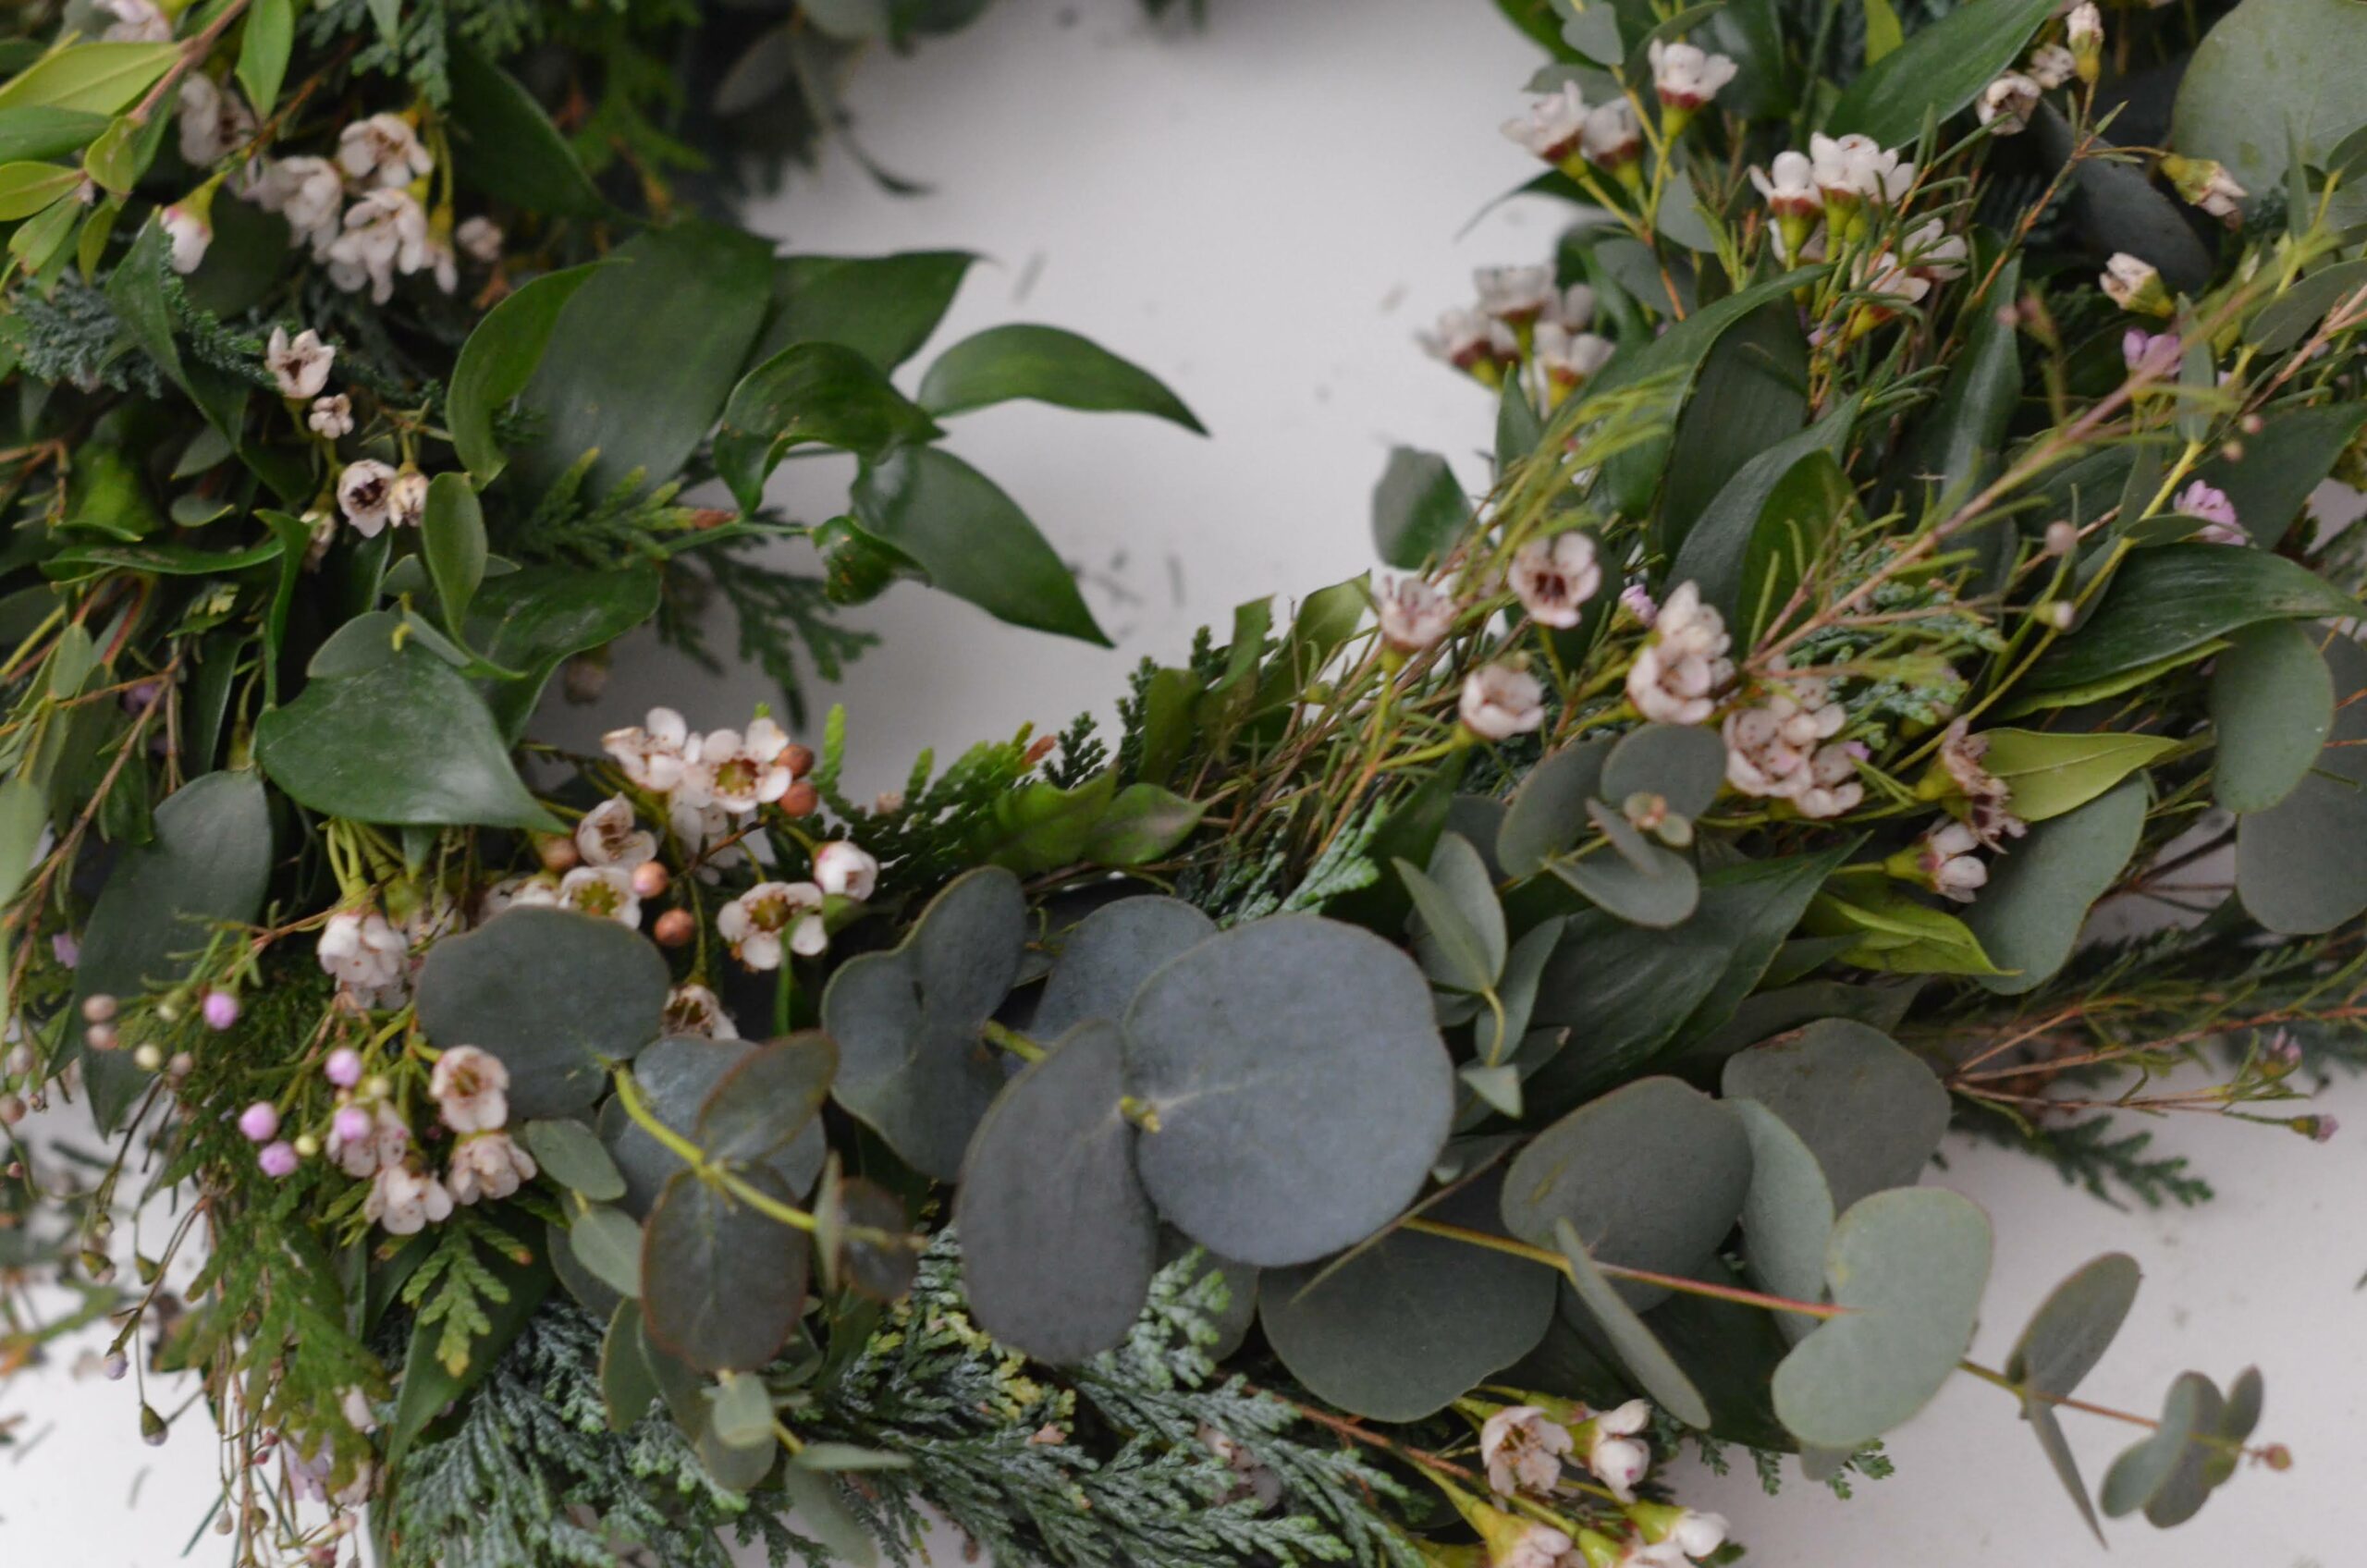 Festive Wreath Workshops with North & Flower Macclesfield Cheshire